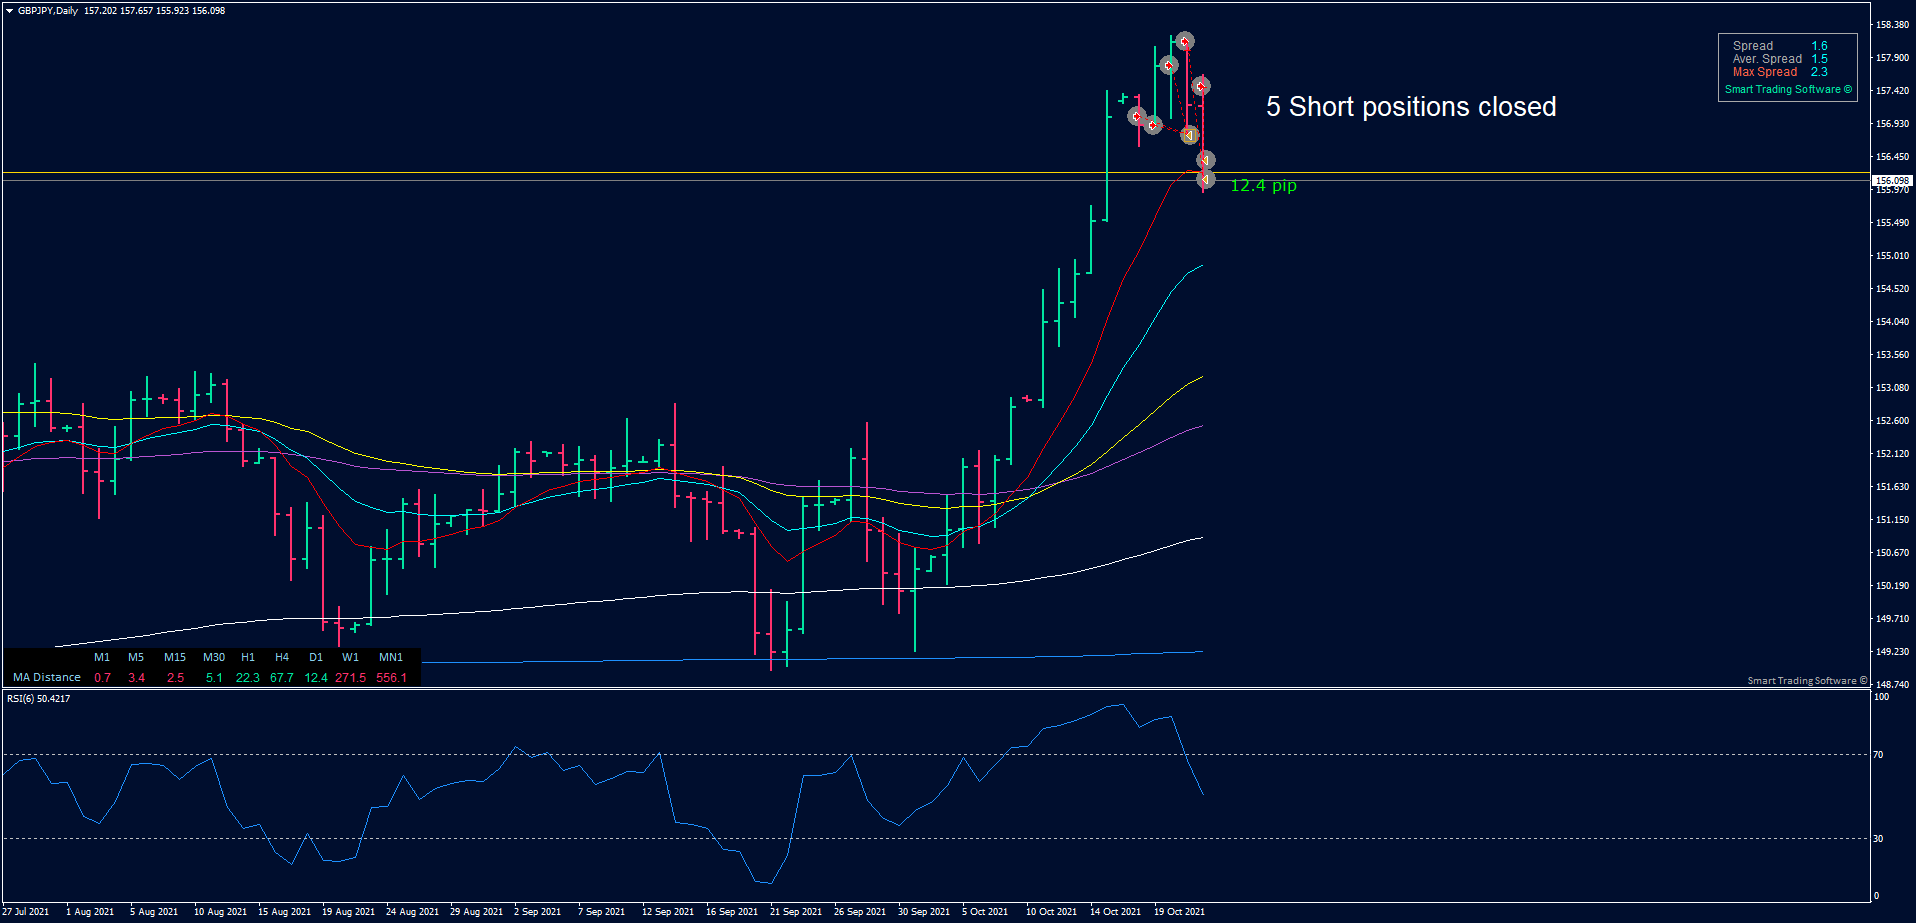 GBP/JPY Daily chart